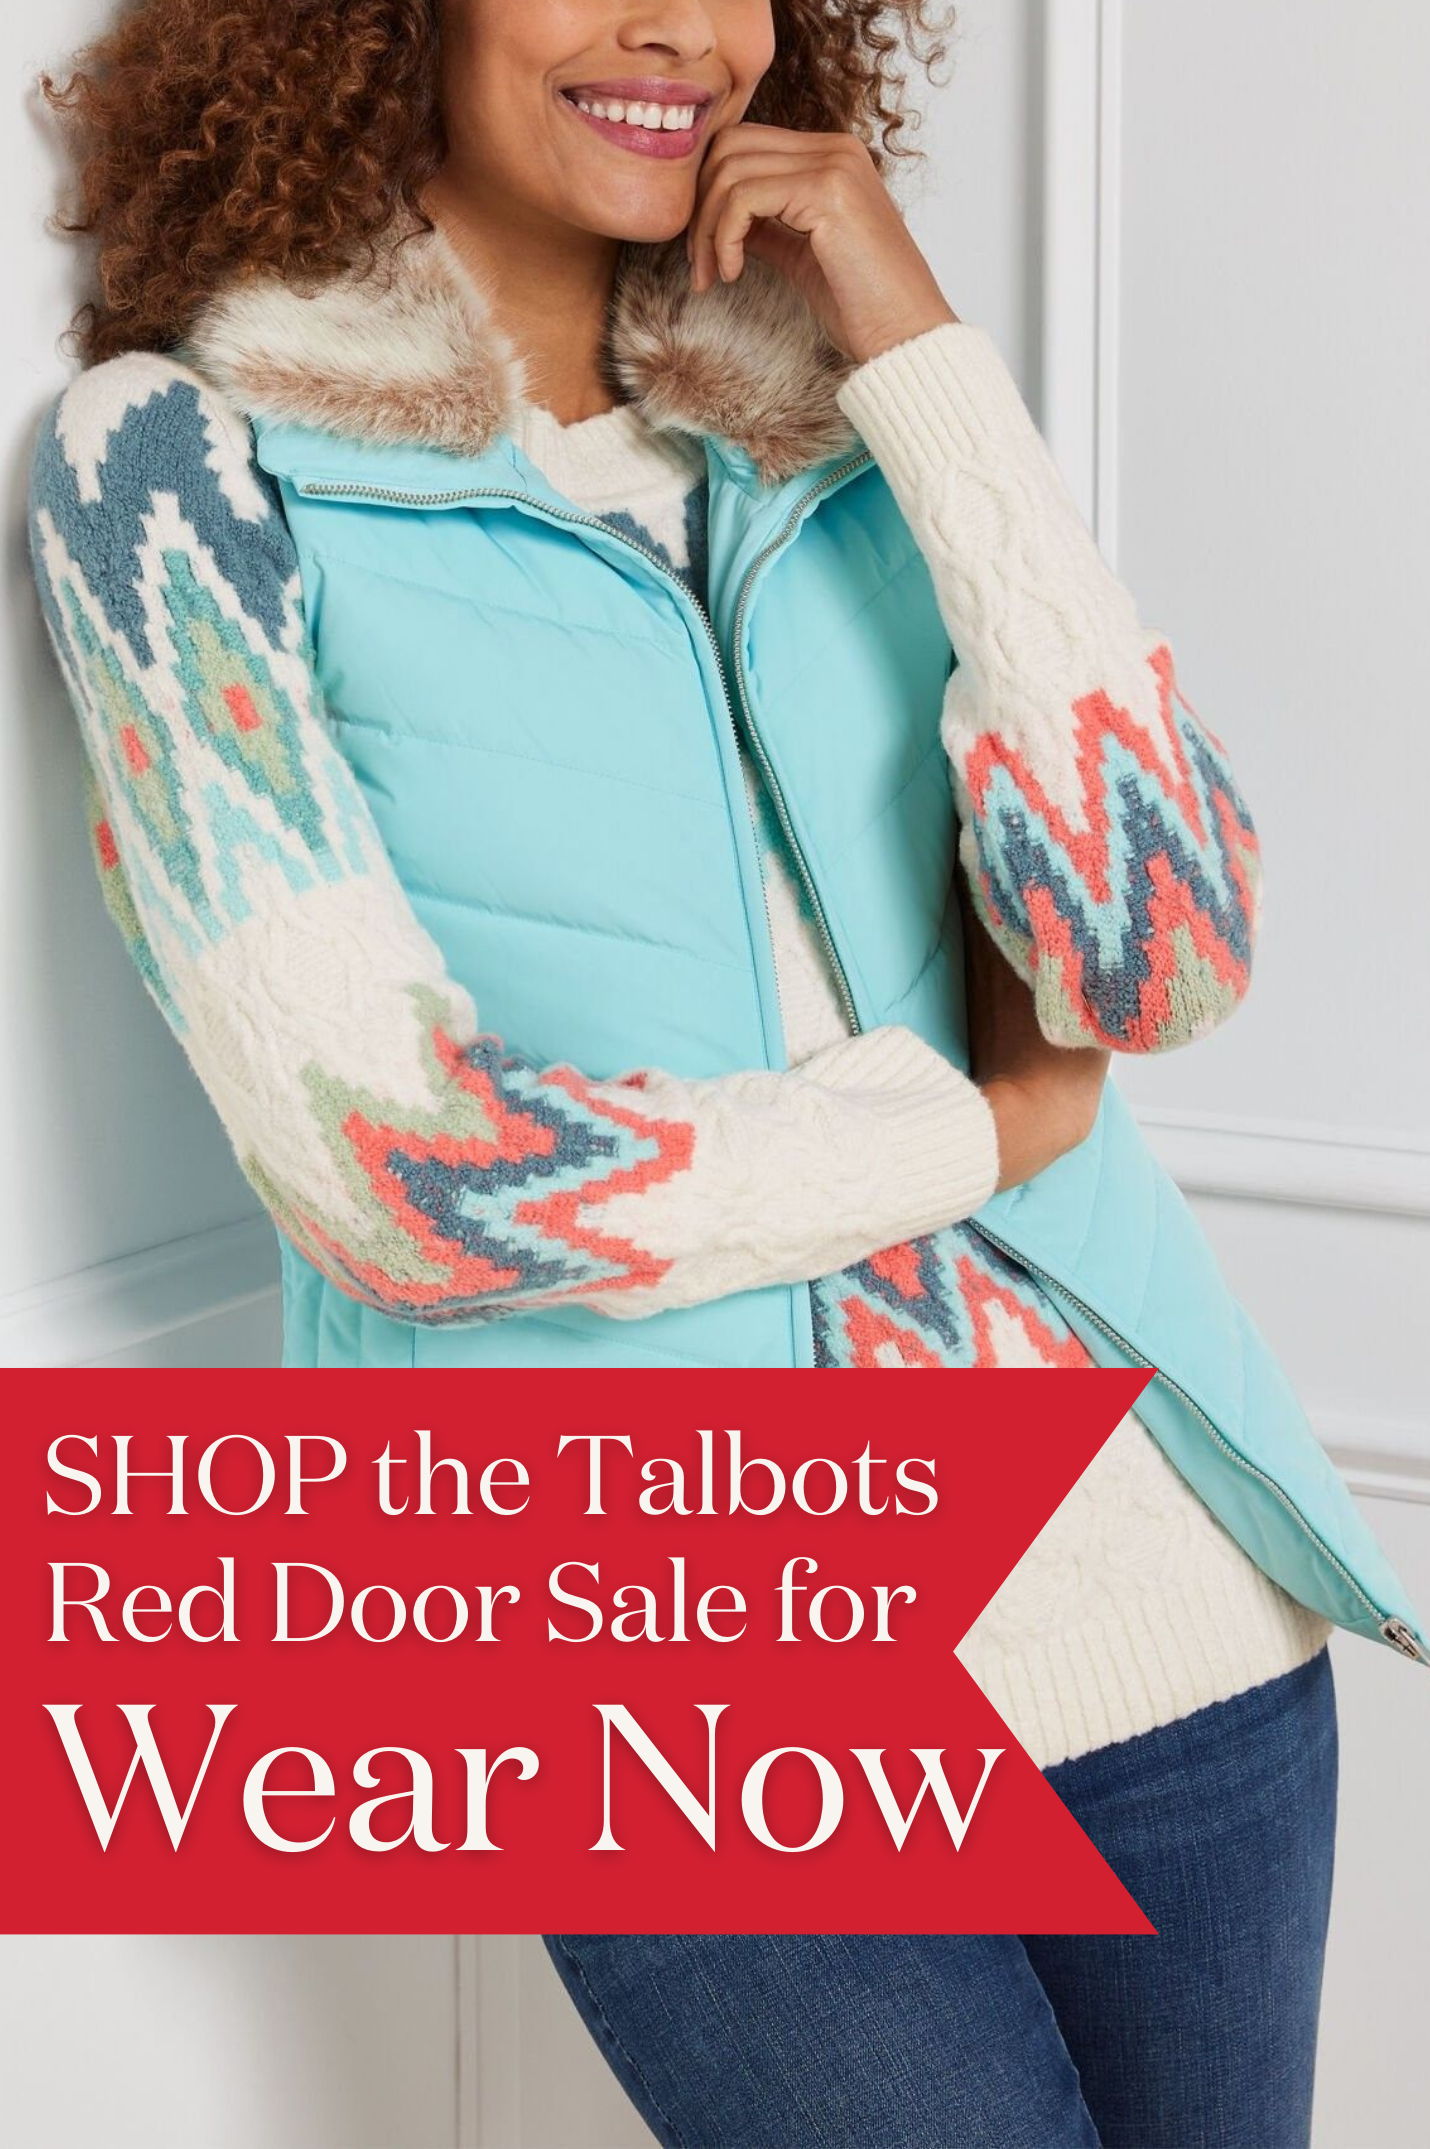 Shop the Red Door Sale for Wear Now Fashions